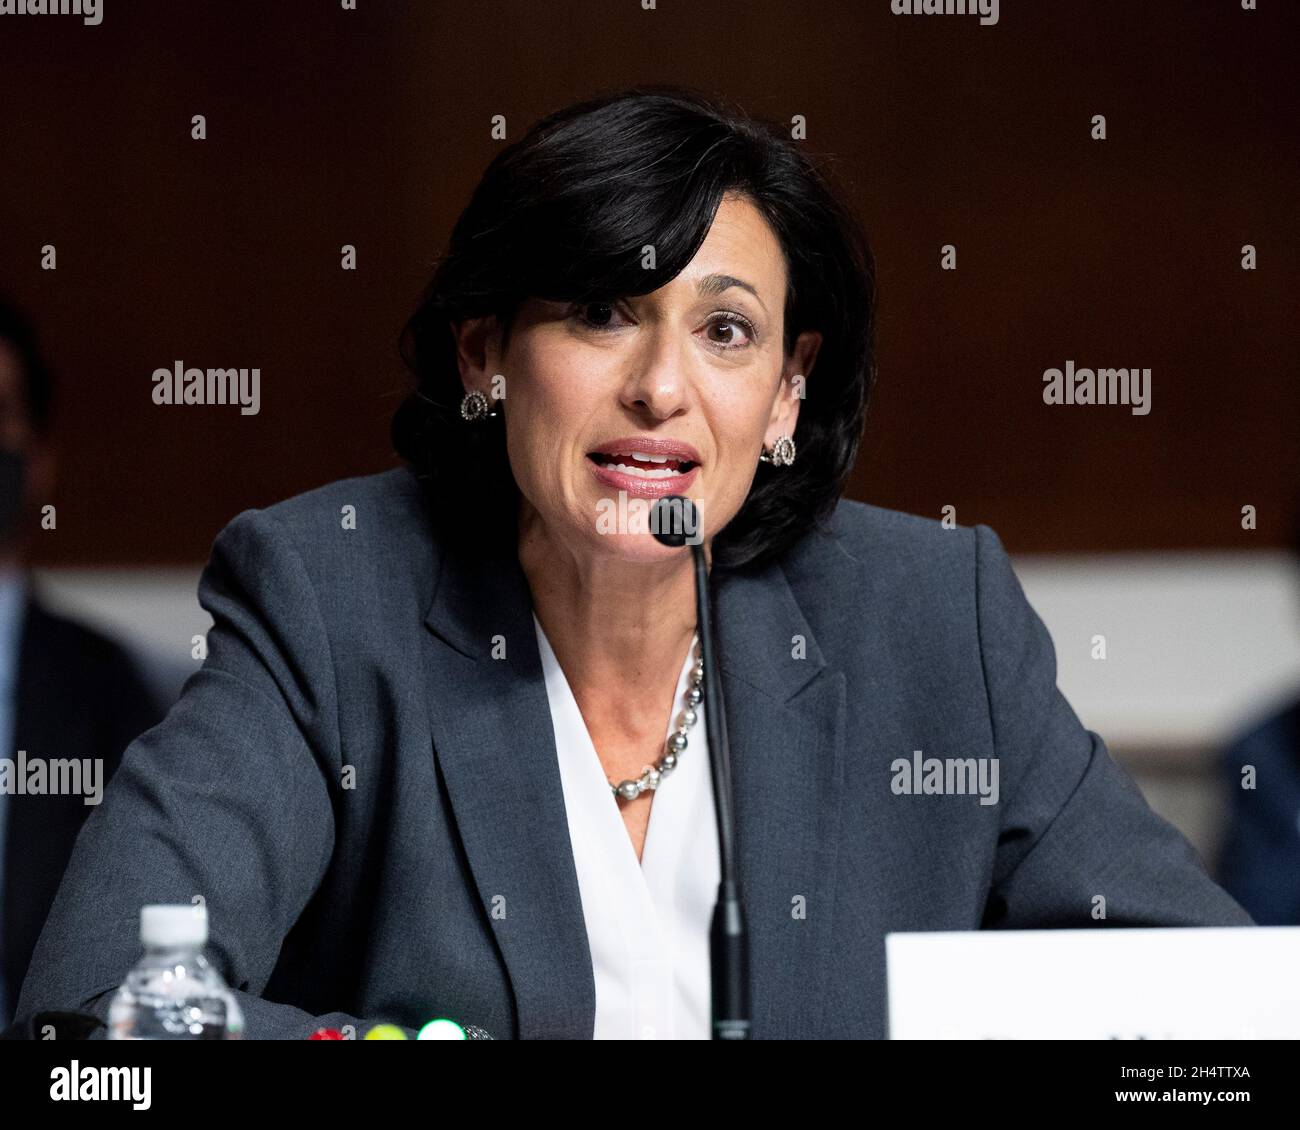 Washington, DC, USA. 4th Nov, 2021. November 4, 2021 - Washington, DC, United States: Dr. ROCHELLE WALENSKY, Director of the Centers for Disease Control and Prevention, speaking at a hearing of the Senate Health, Education, Labor, and Pensions Committee. (Credit Image: © Michael Brochstein/ZUMA Press Wire) Stock Photo